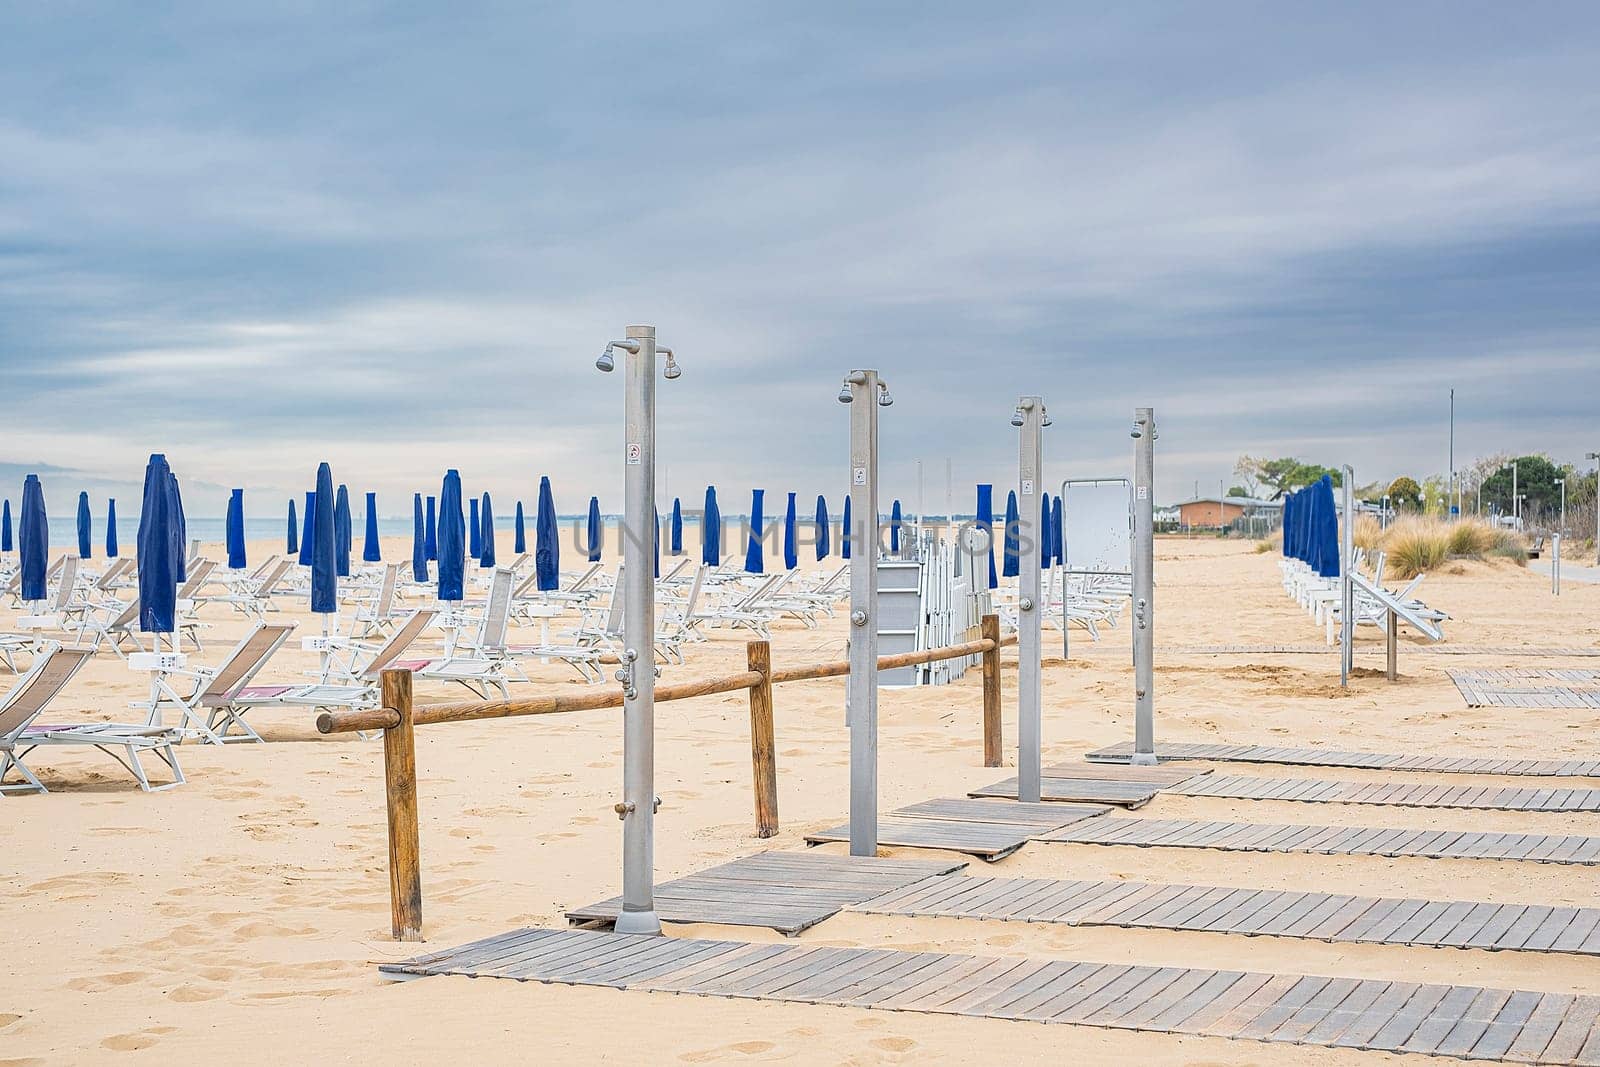 Outdoor public showers on the beach in Italy, summer holiday concept.